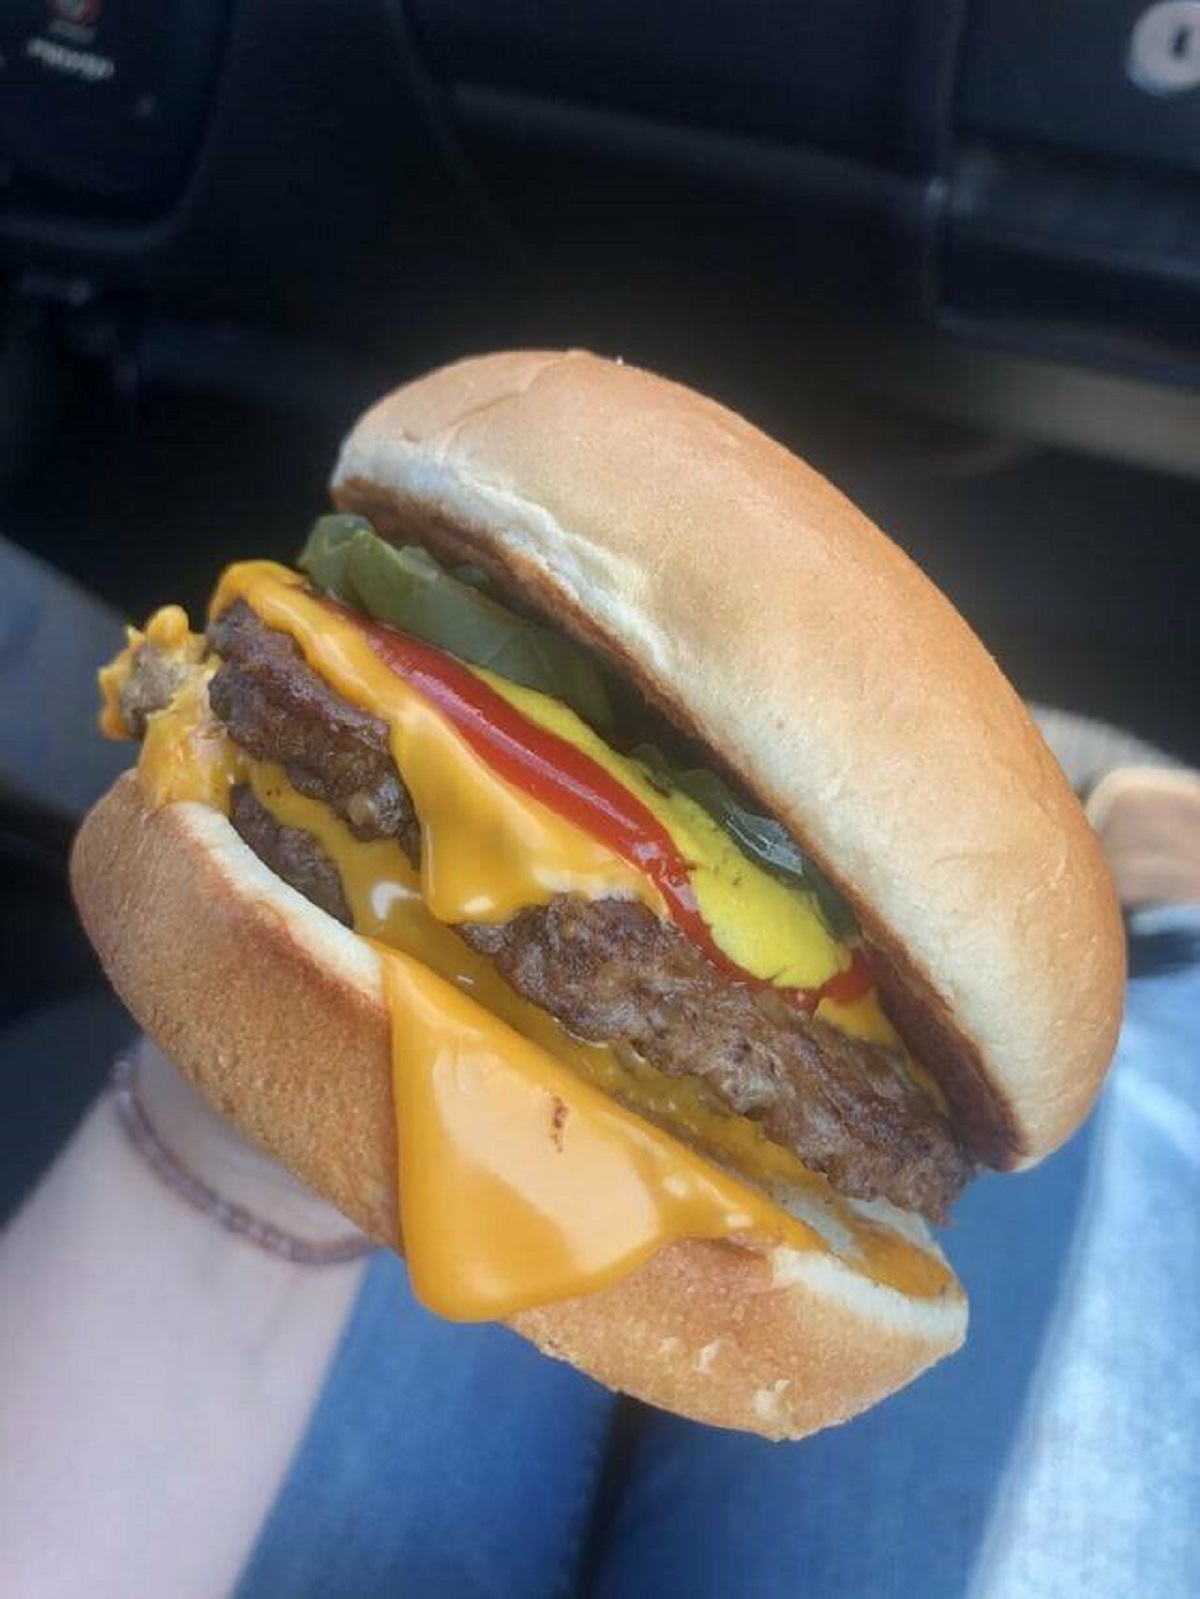 "This perfect looking burger I got from Dairy Queen"